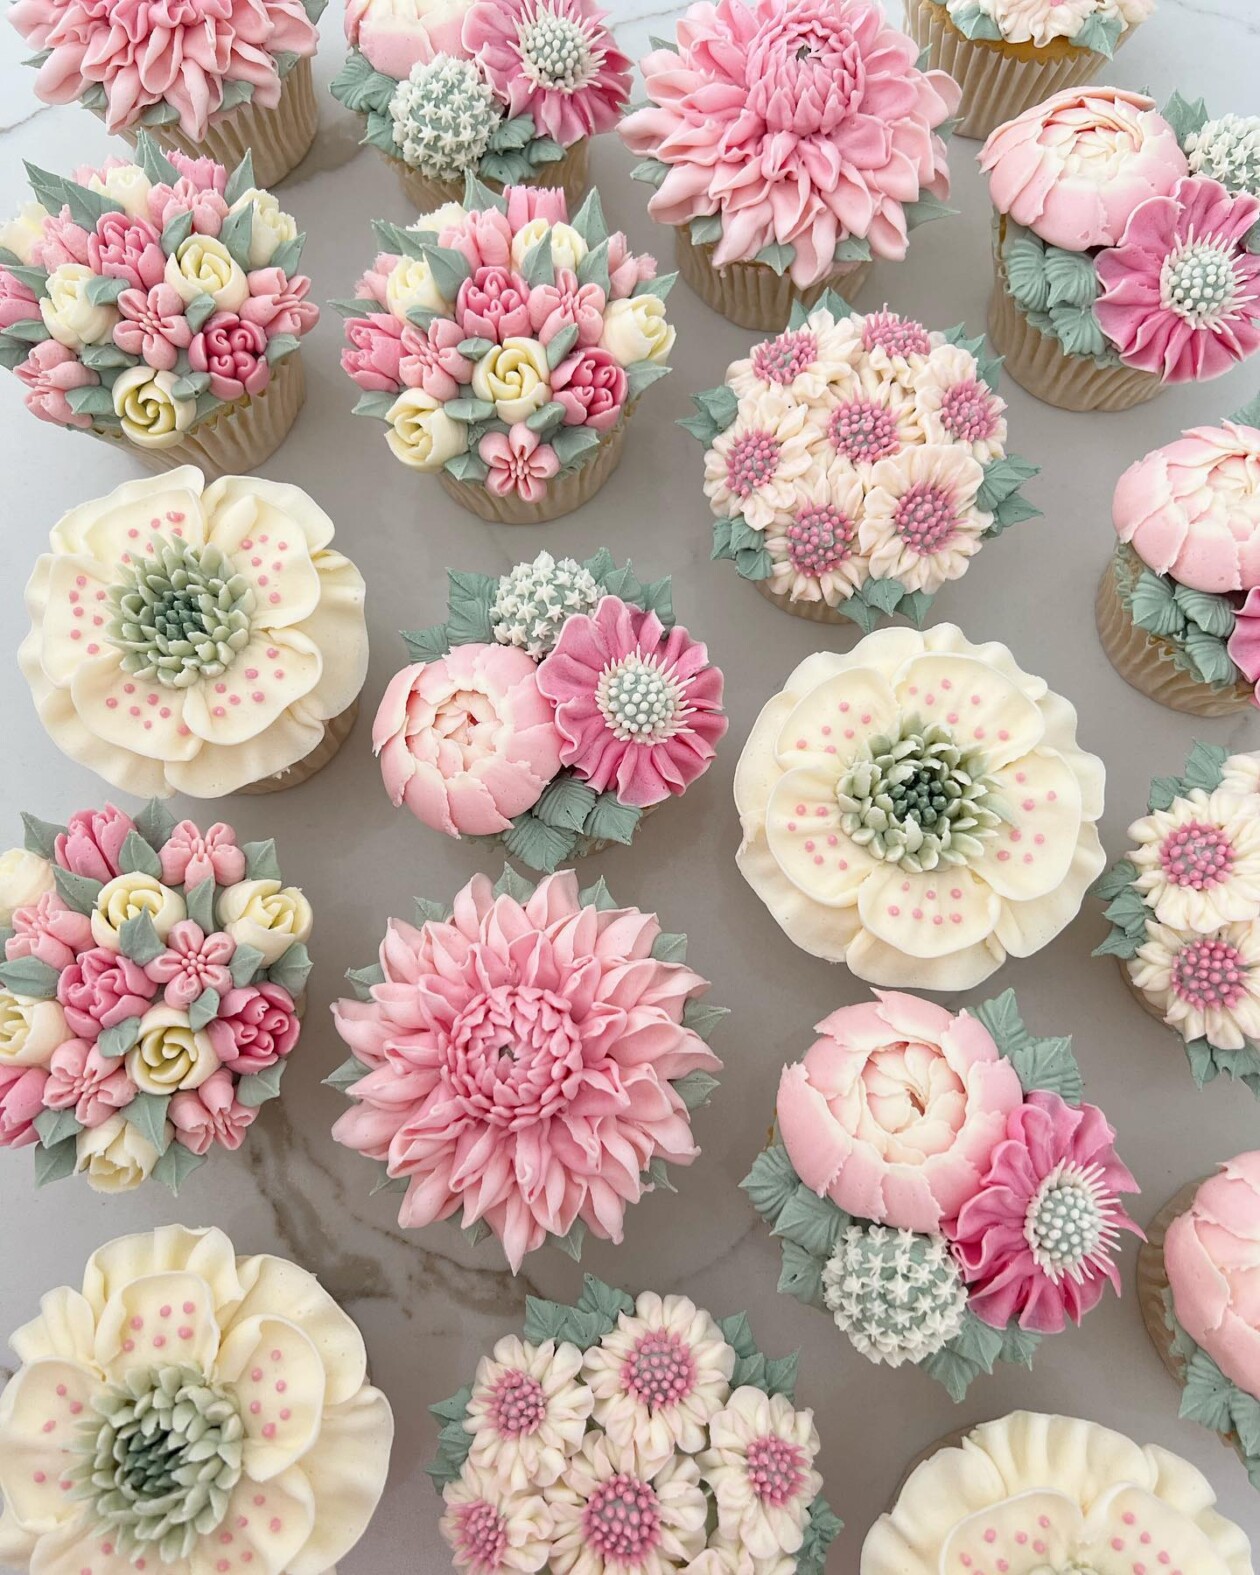 Gorgeous Cupcakes Decorated With Buttercream Flowers And Succulents By Kerry's Bouqcakes (1)